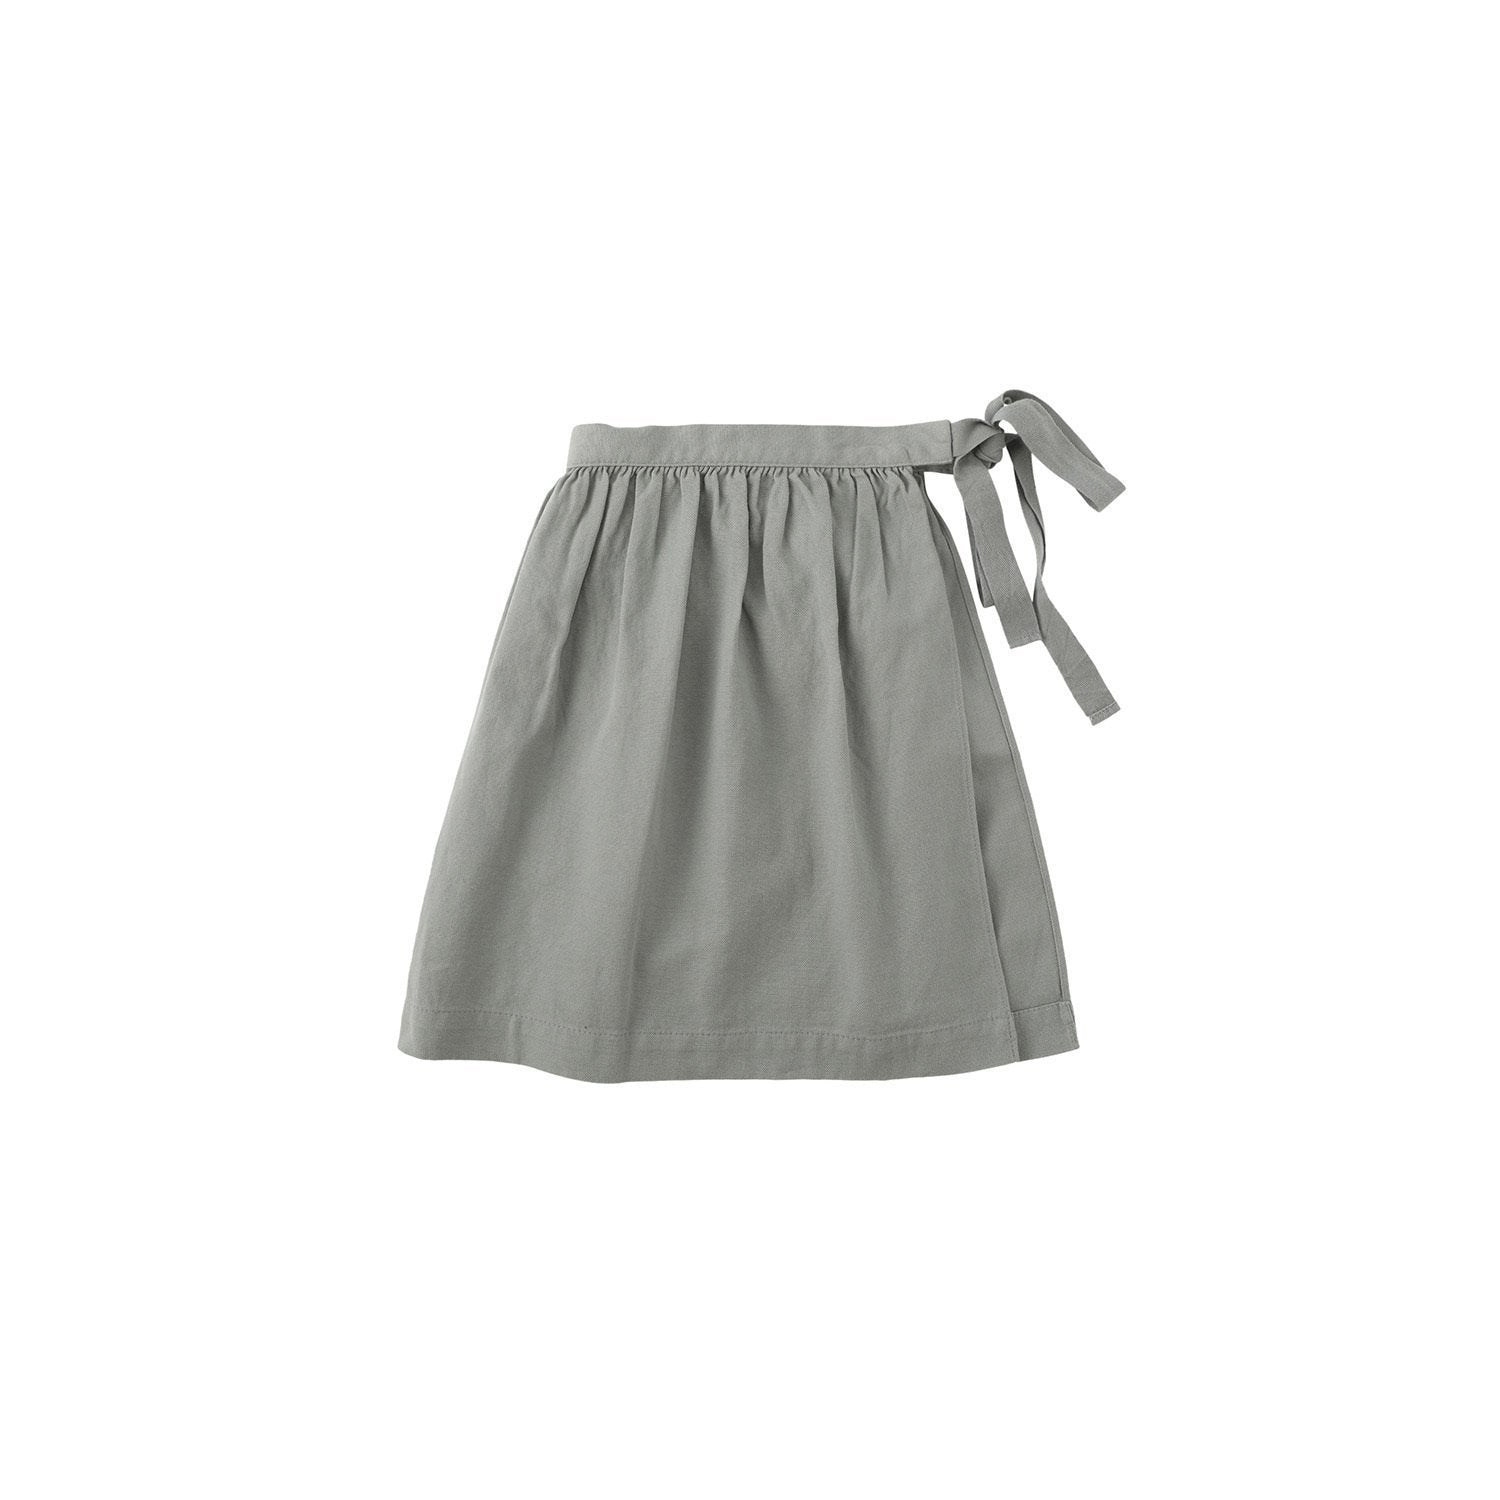 Grassy Wickel Rock find Stylish Fashion for Little People- at Little Foxx Concept Store